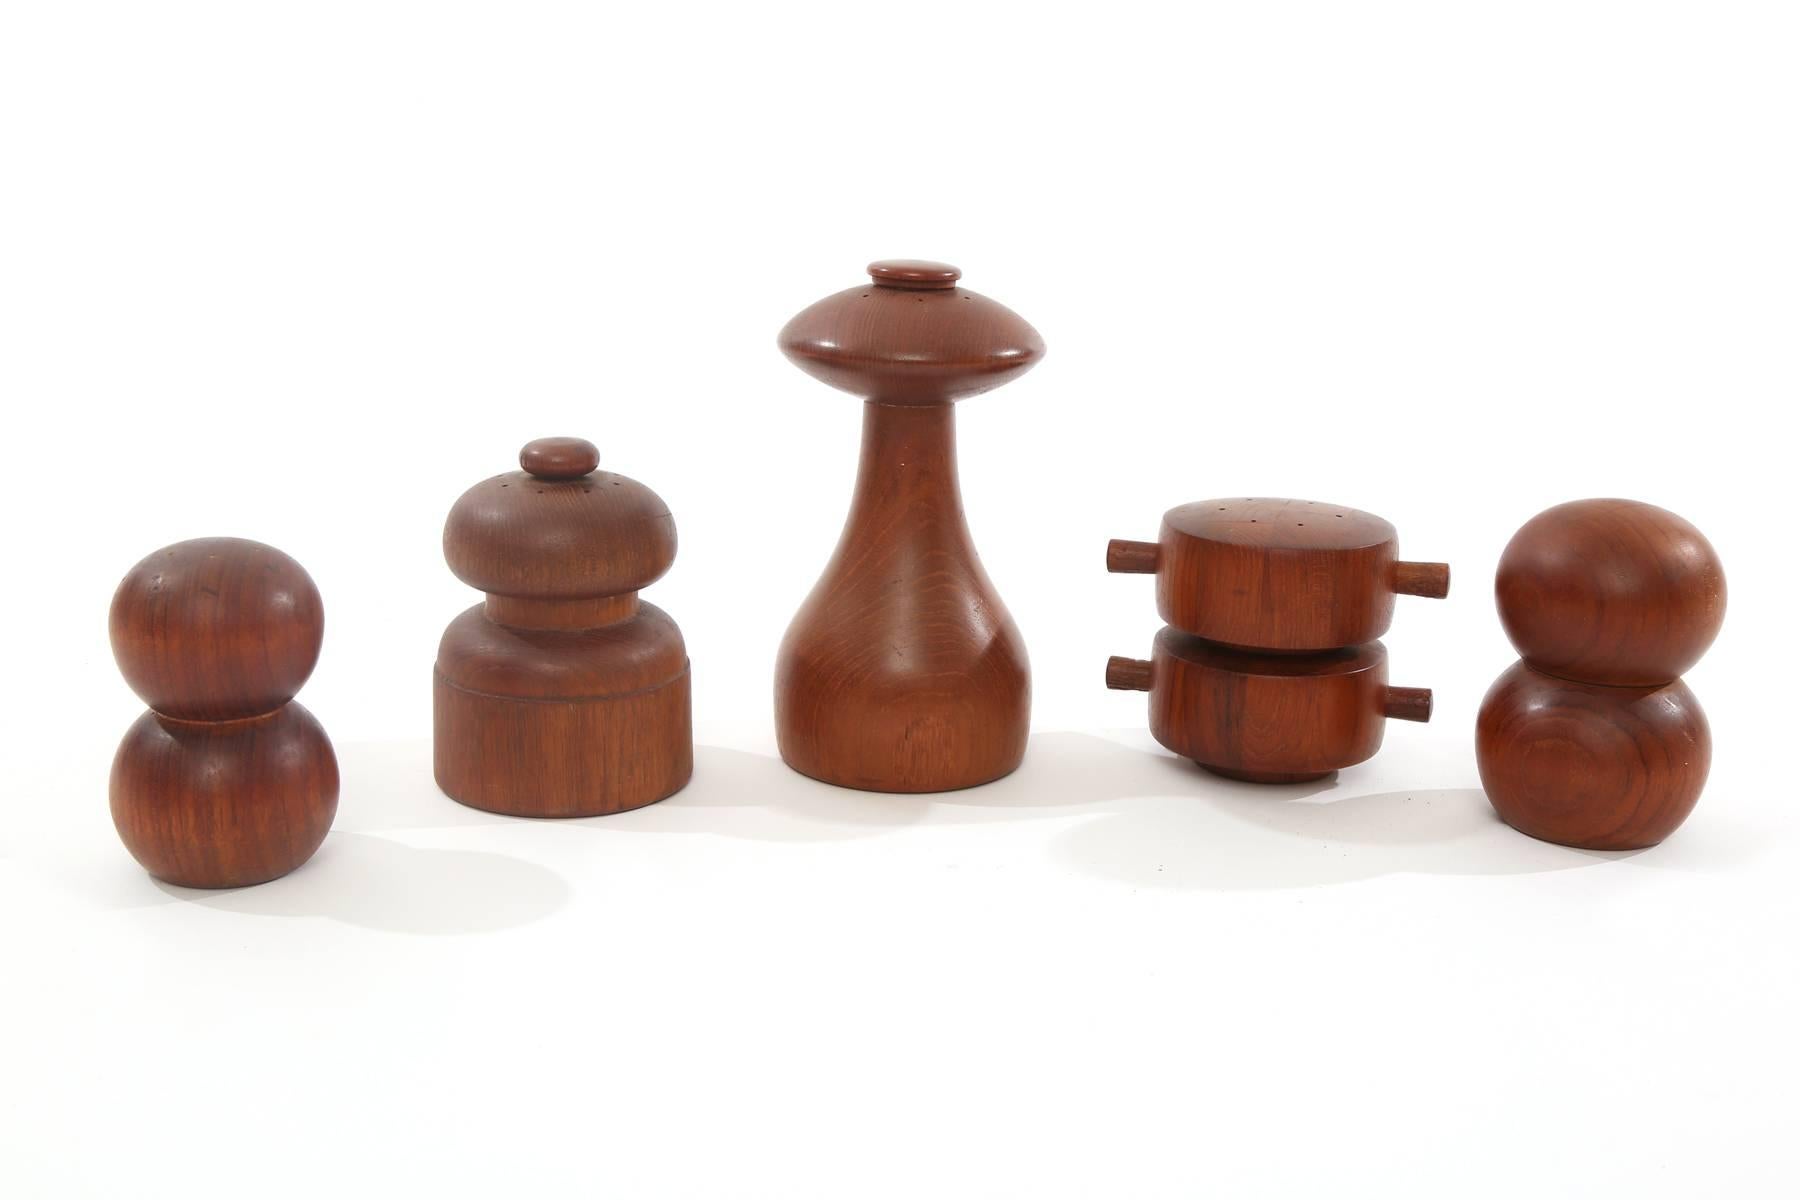 Grouping of early Dansk solid teak pepper mills, circa early 1960s. Smallest example measures 4